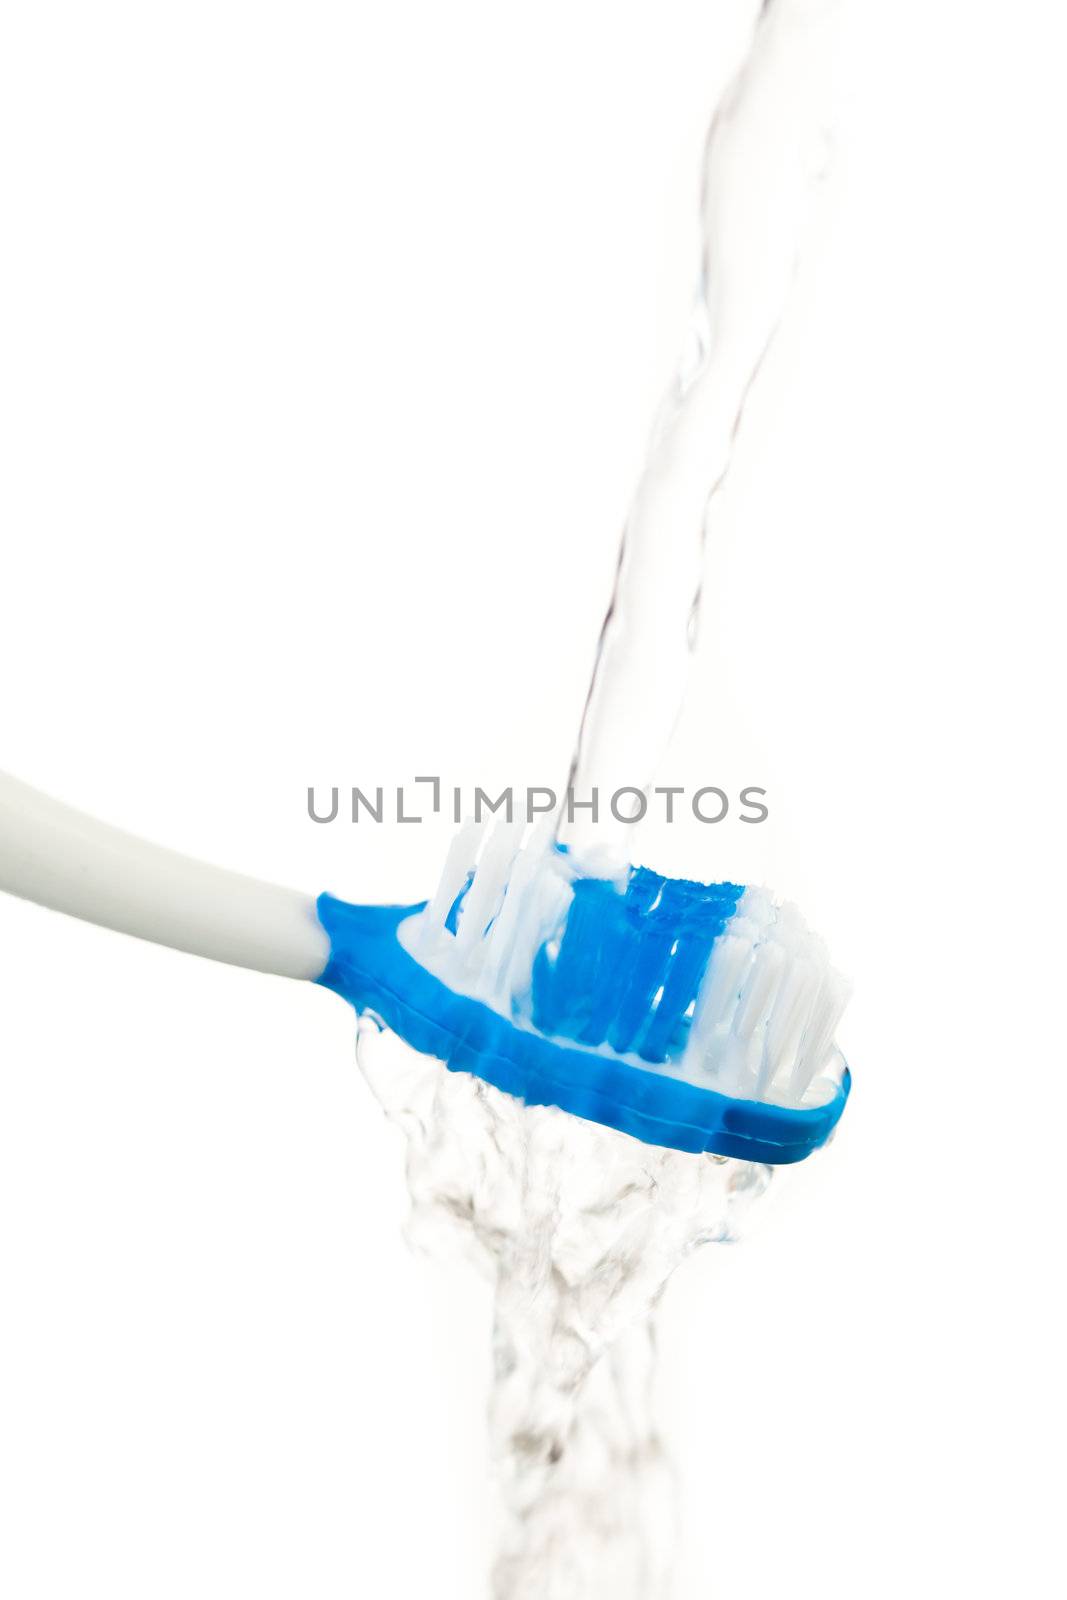 Water flowing on a toothbrush against white background